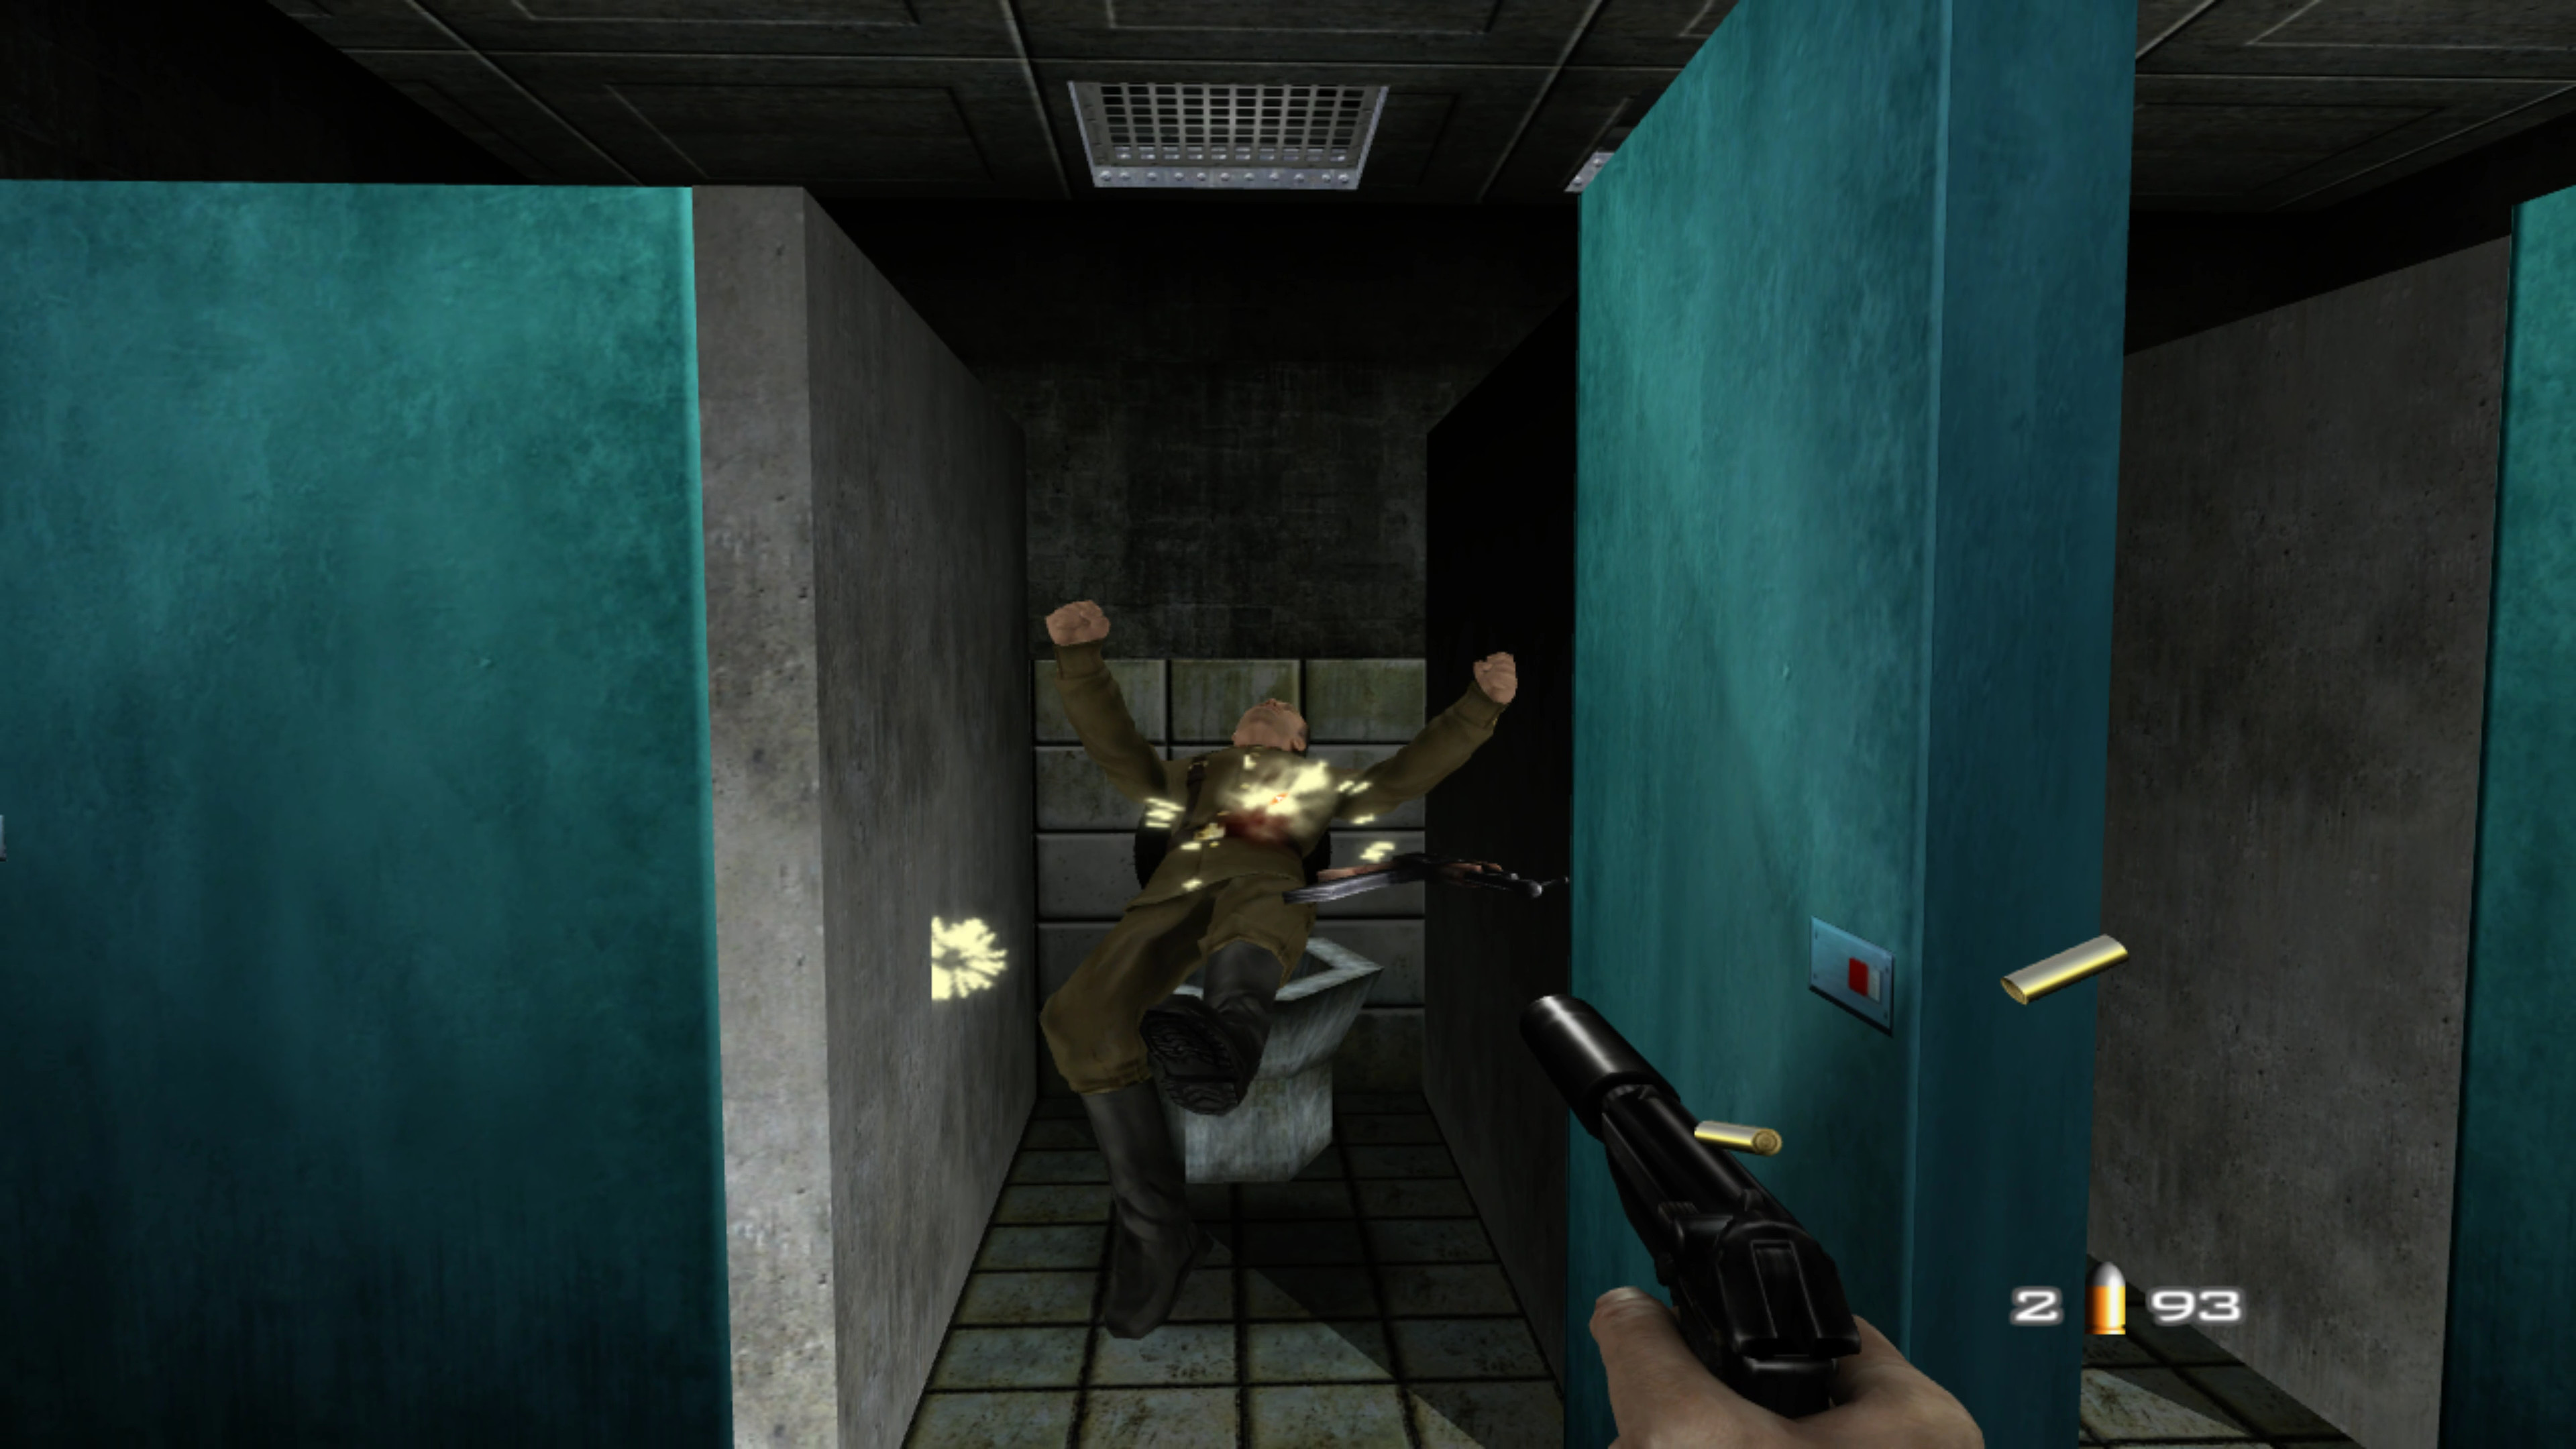 Xbox 360's GoldenEye 007 remake is now available onlineand